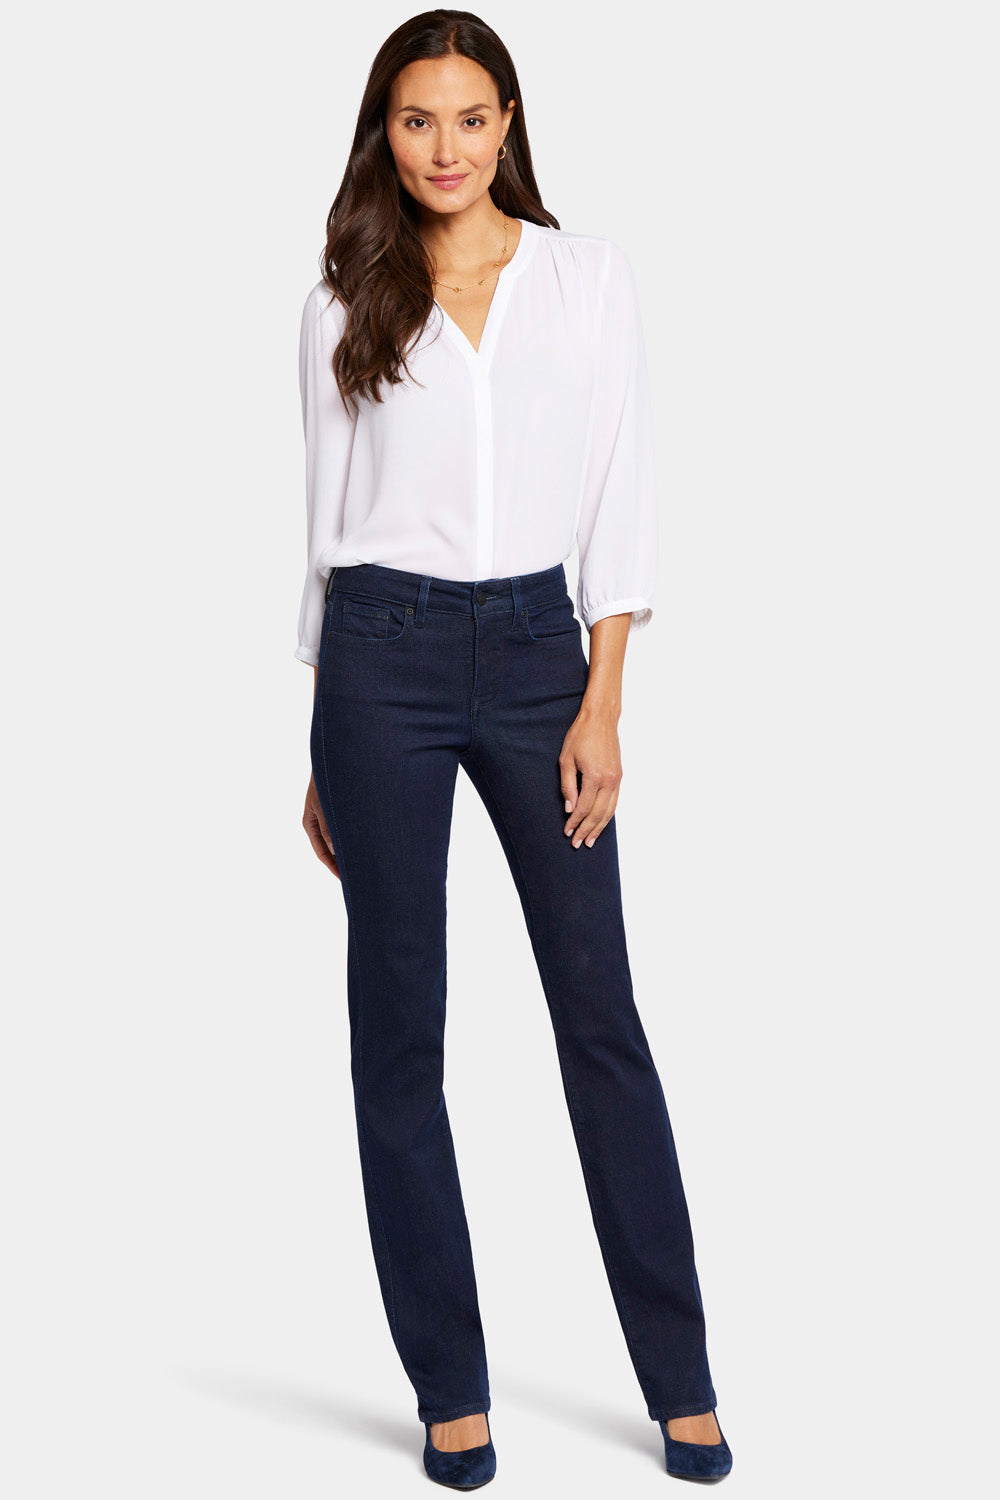 Marilyn Straight Jeans In Petite With Short 28